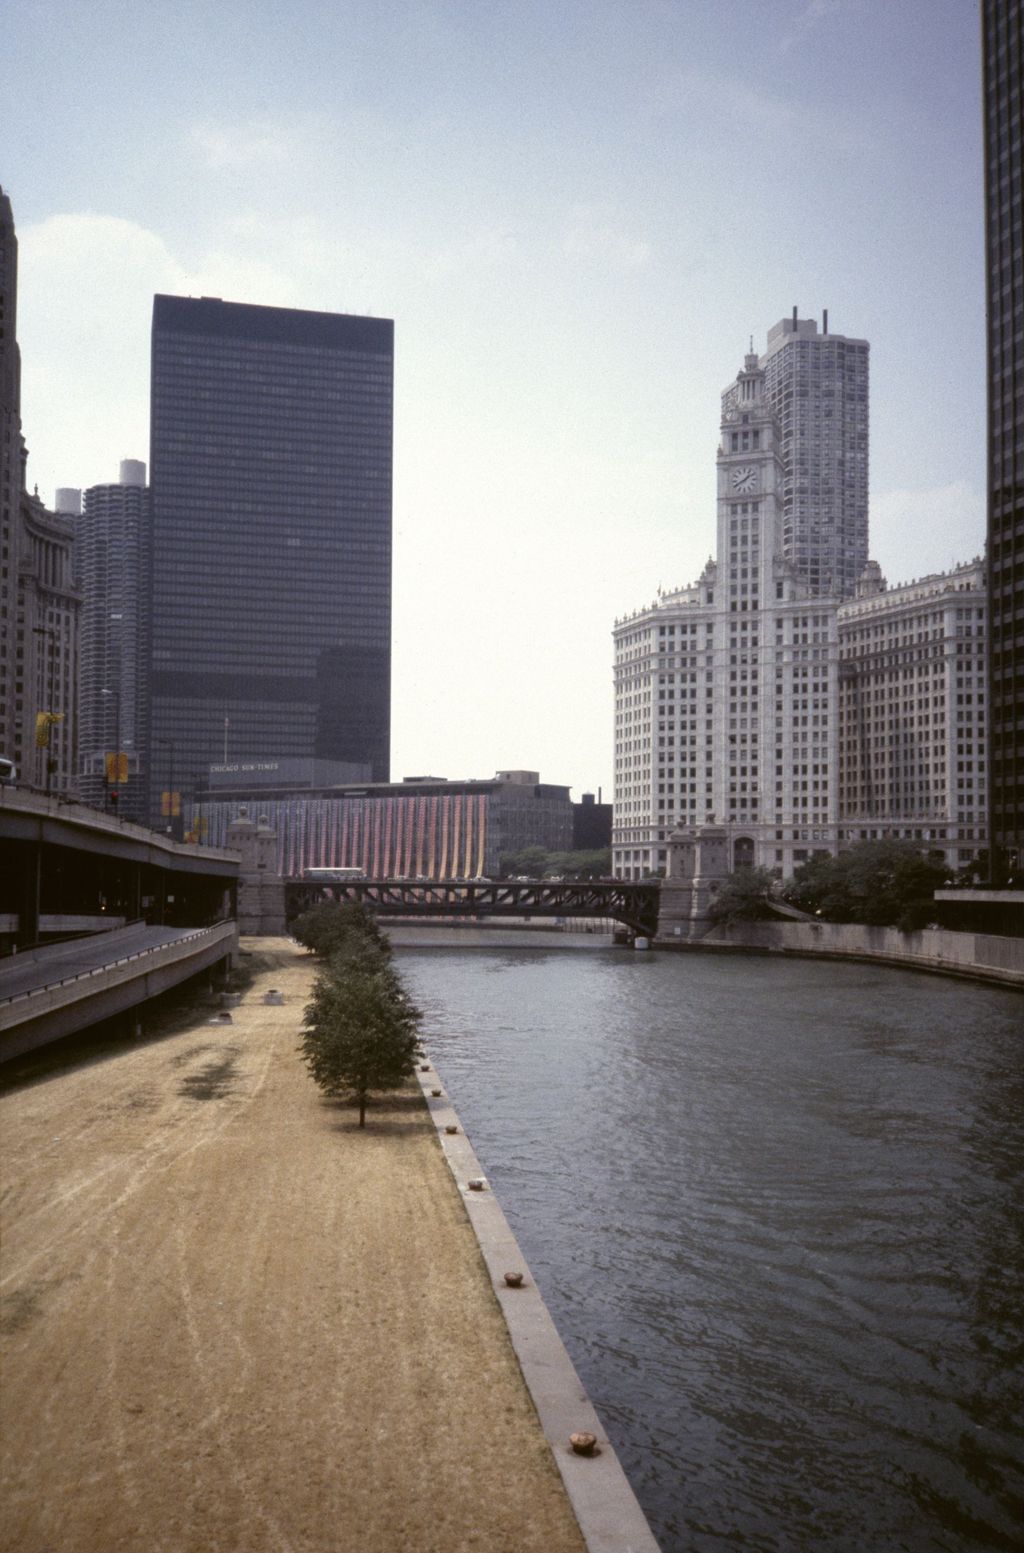 Miniature of Chicago River and Sun-Times Building with fabric ribbons